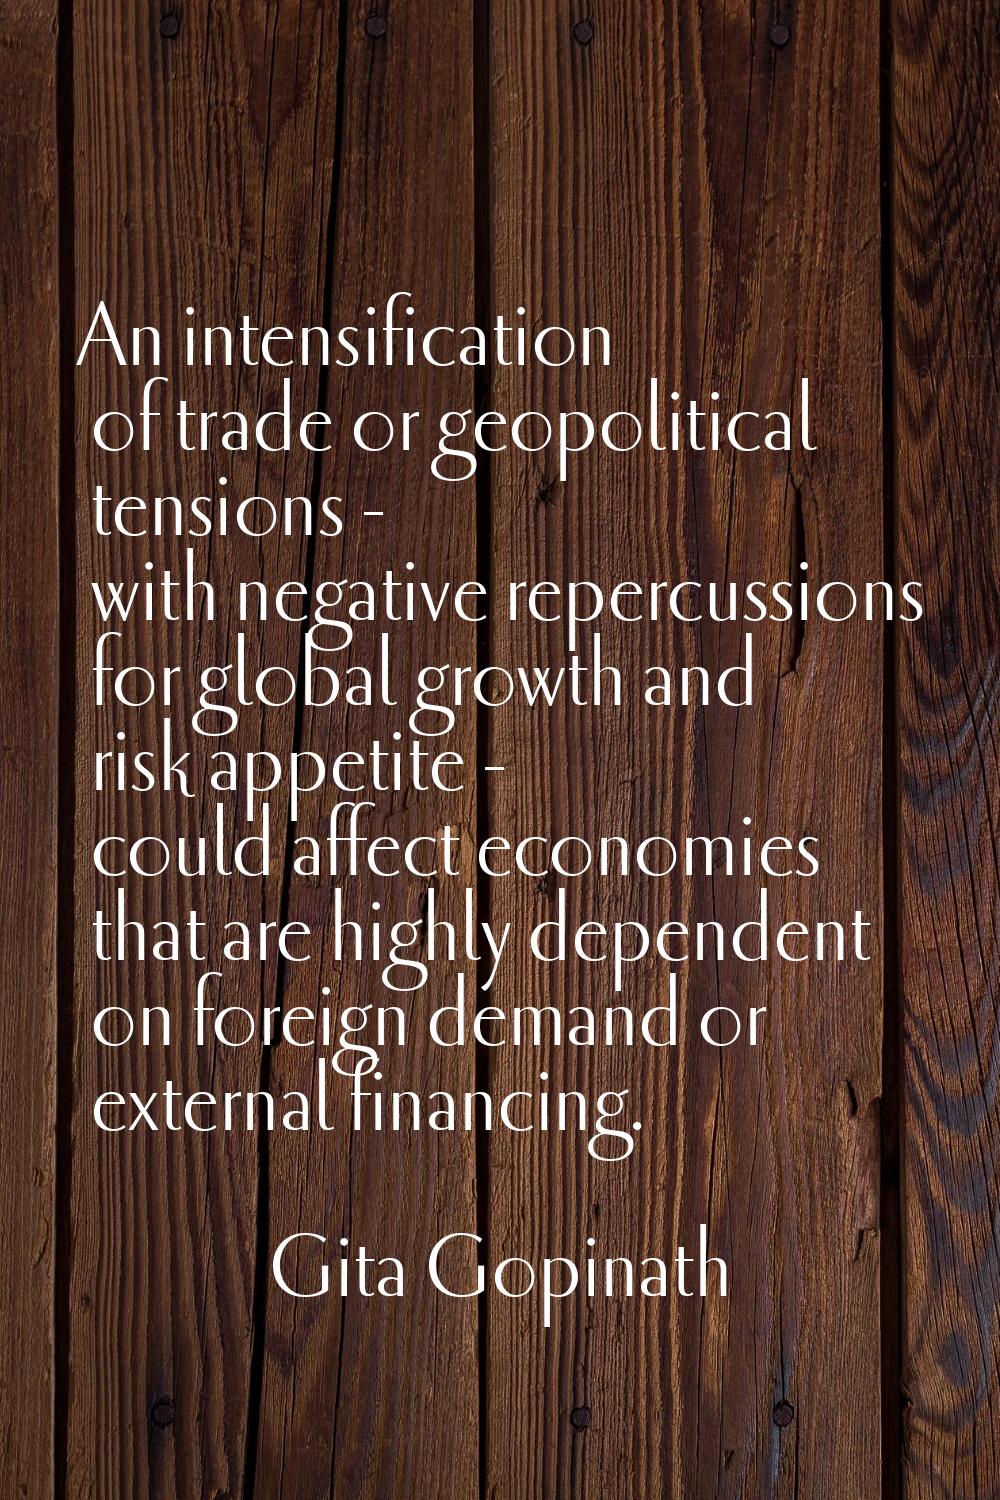 An intensification of trade or geopolitical tensions - with negative repercussions for global growt